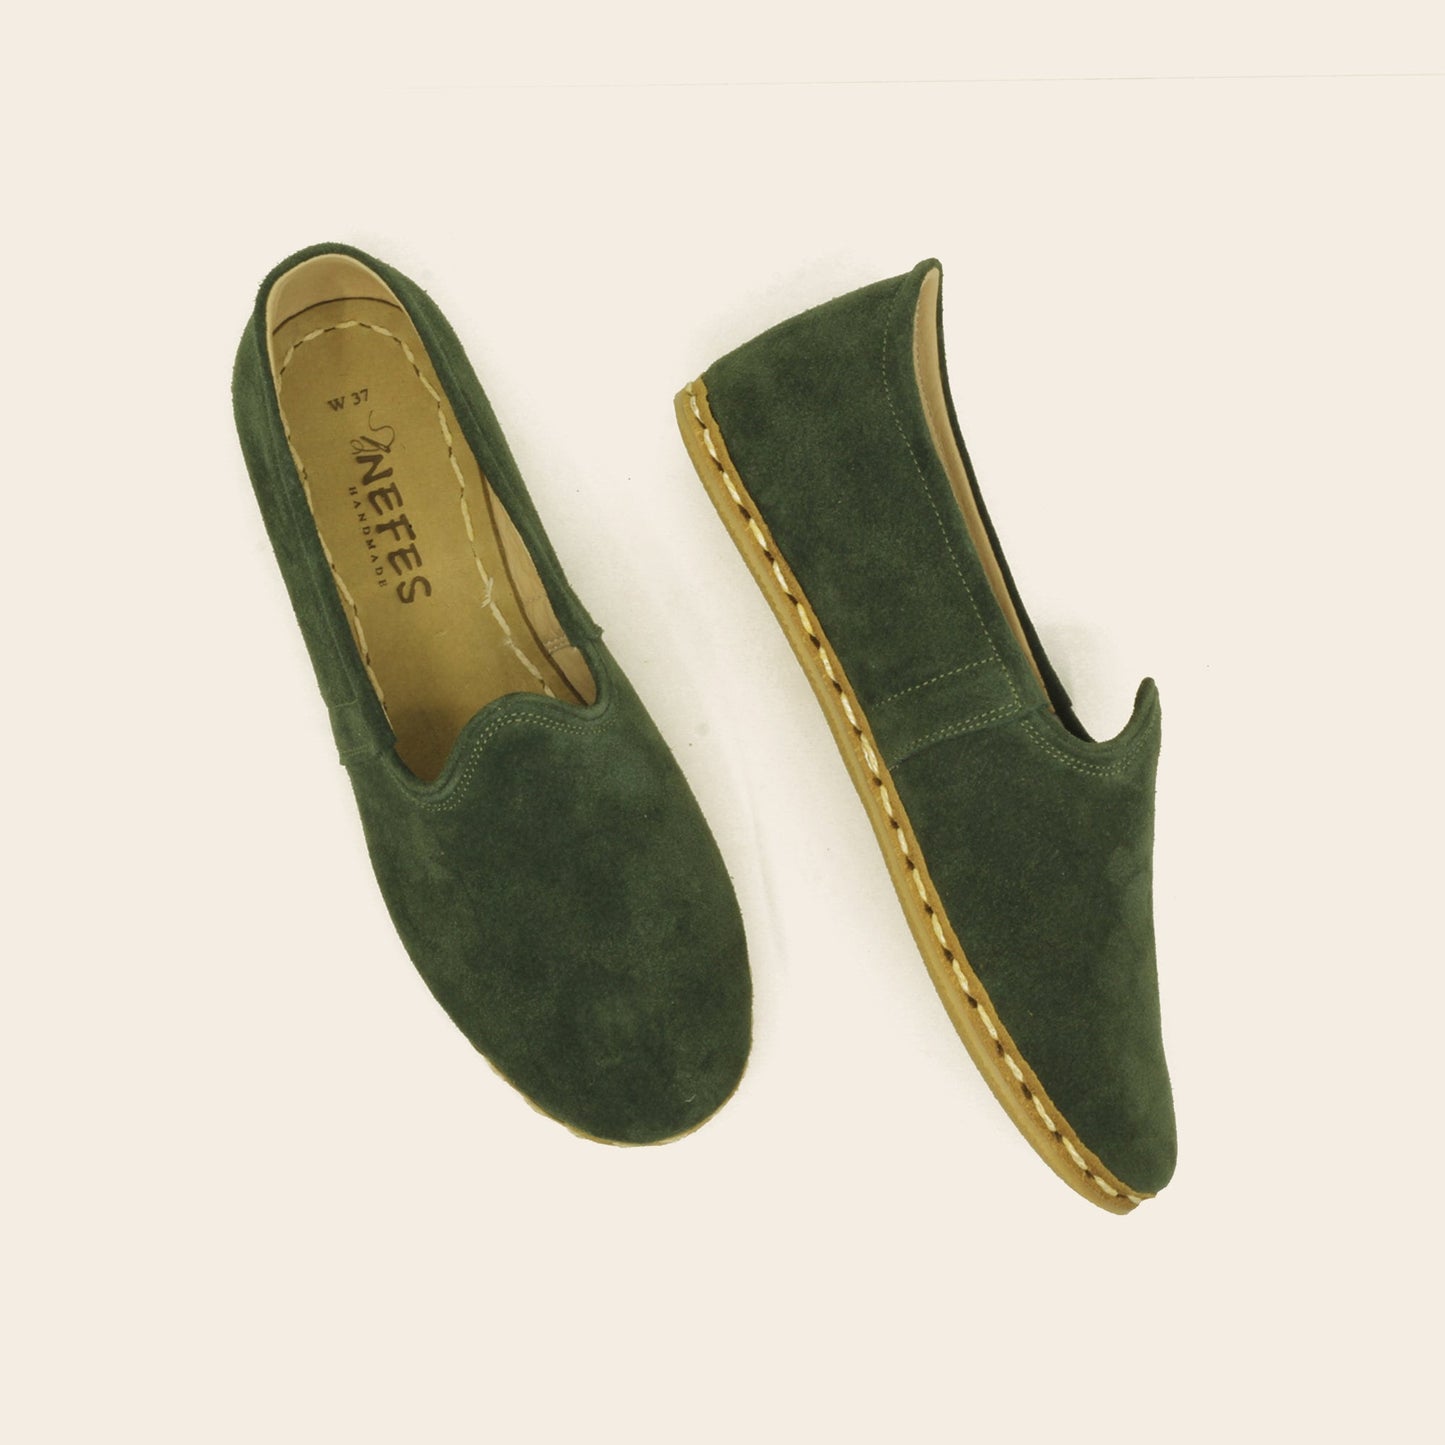 Shoes Suede Green For Women Shoes - Nefes Shoes